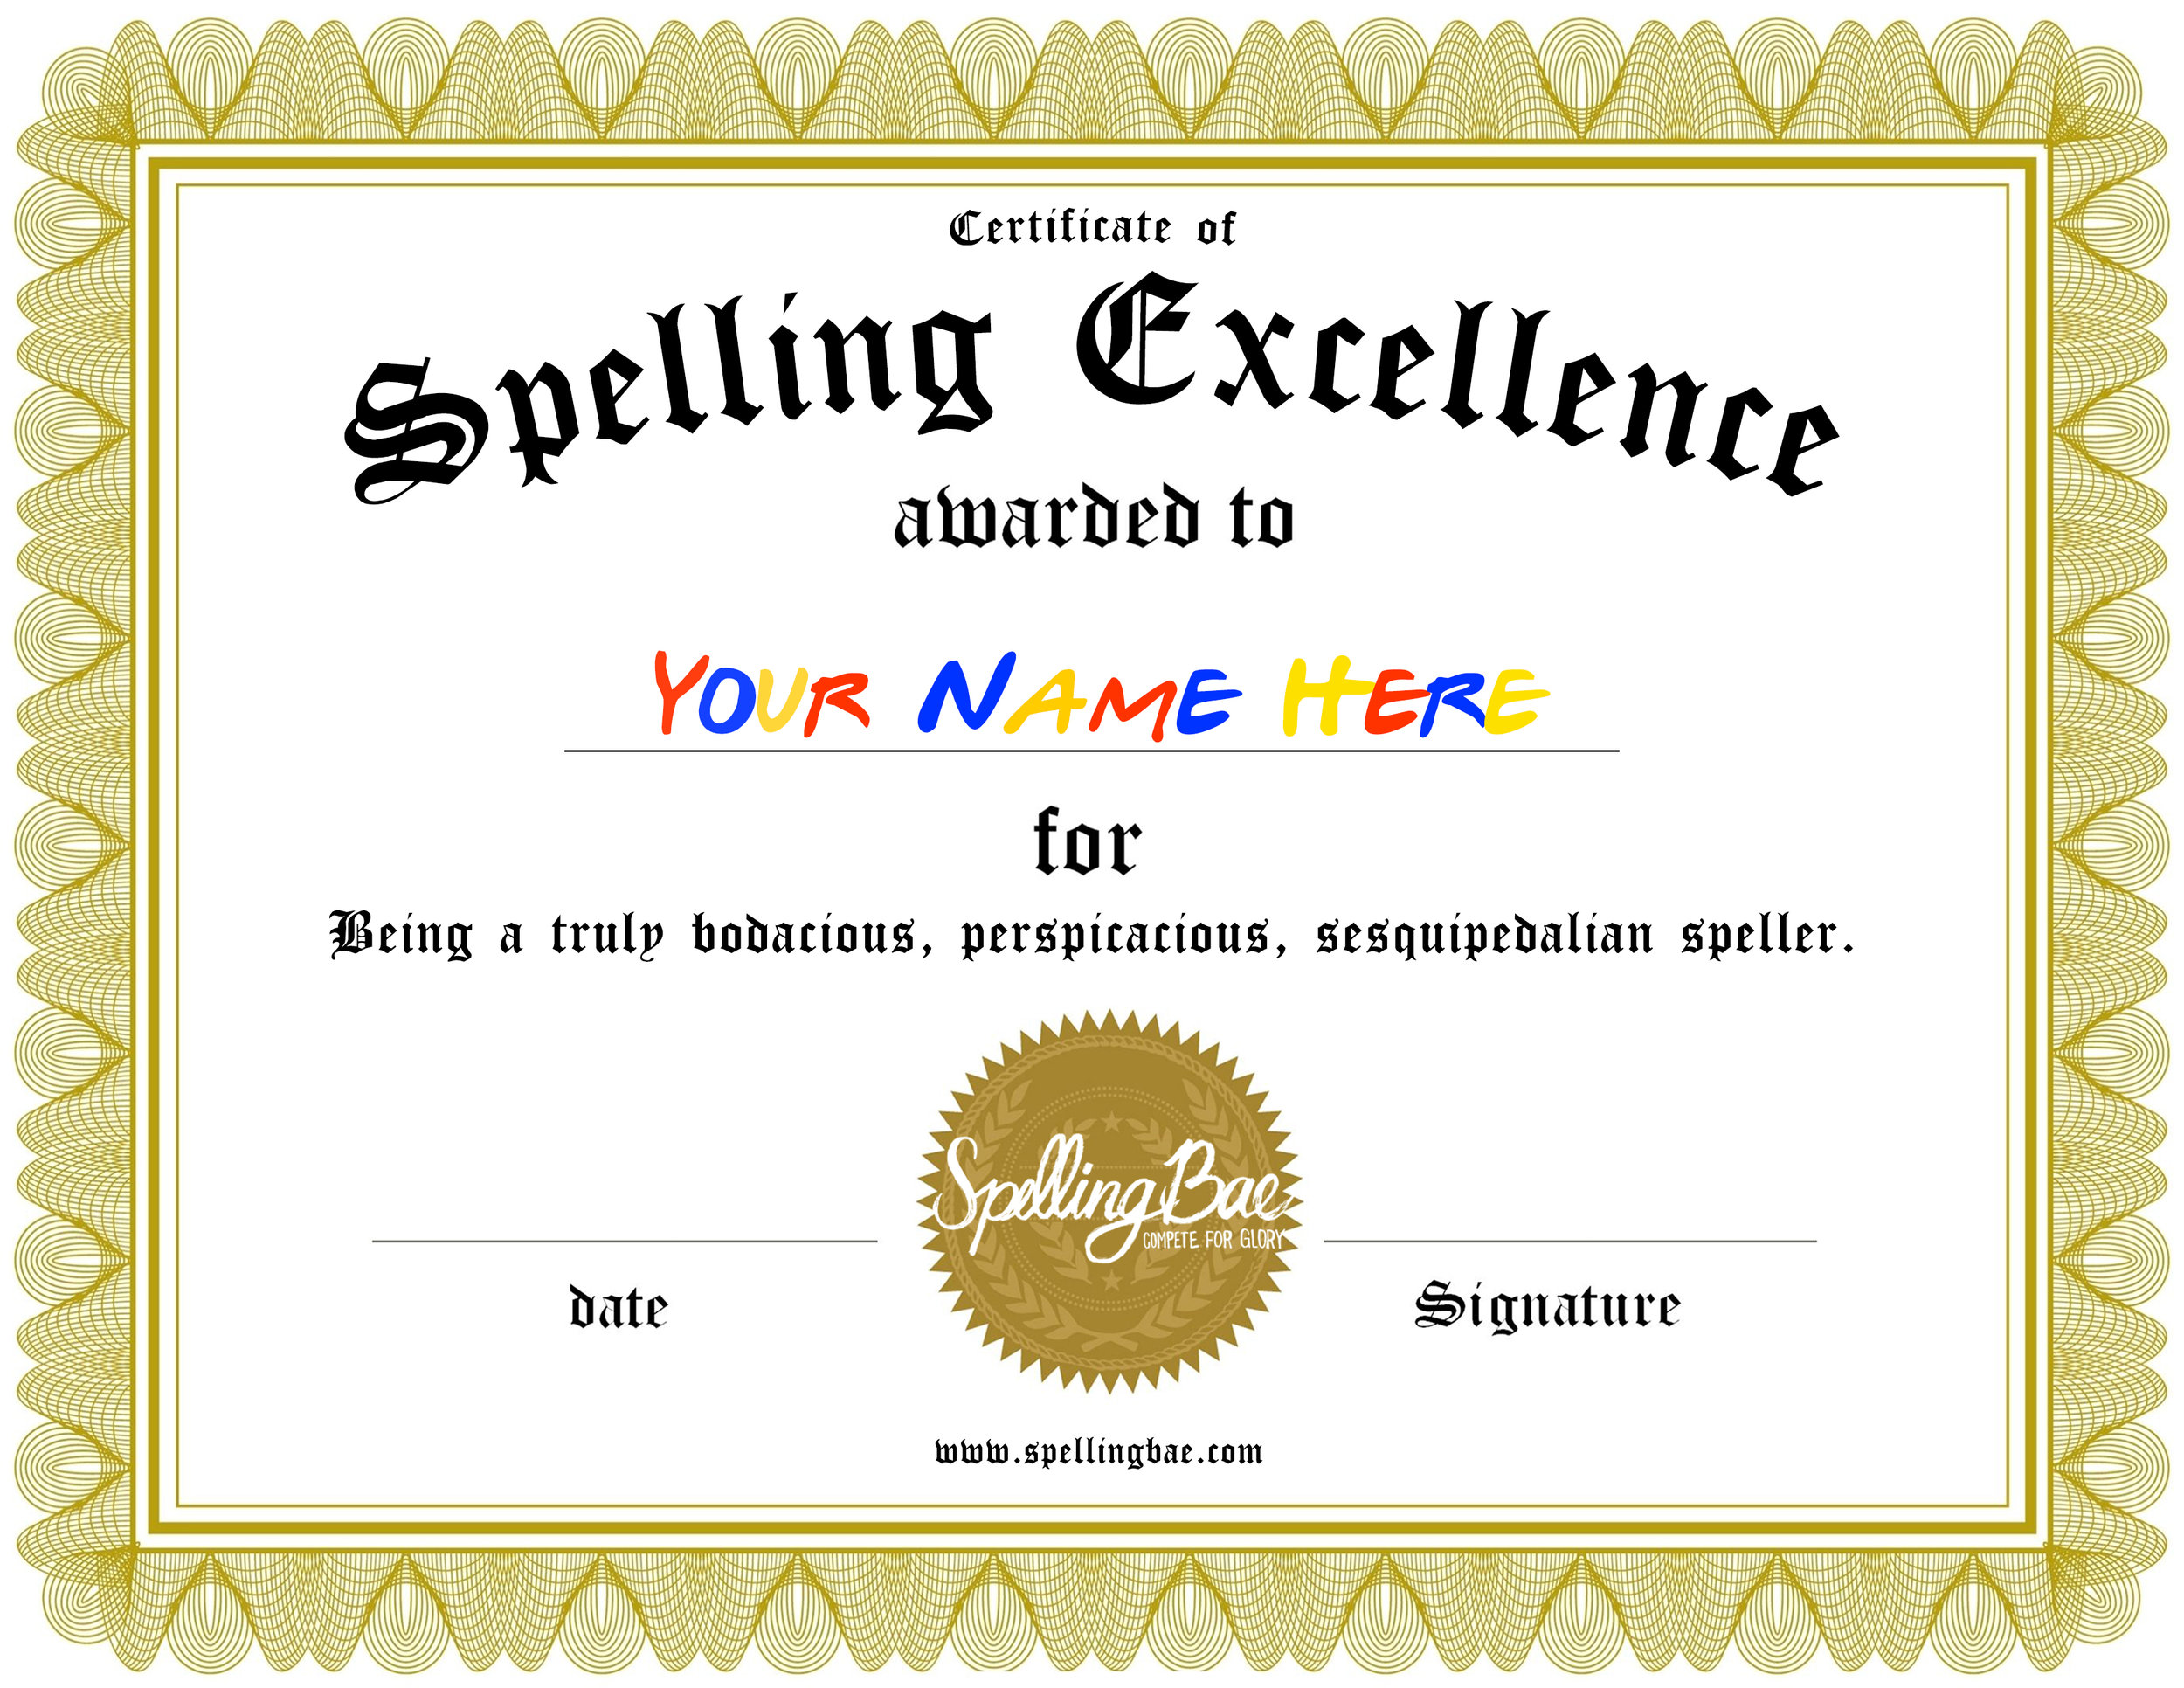 Spelling Bae  Compete for Glory Inside Spelling Bee Award Certificate Template